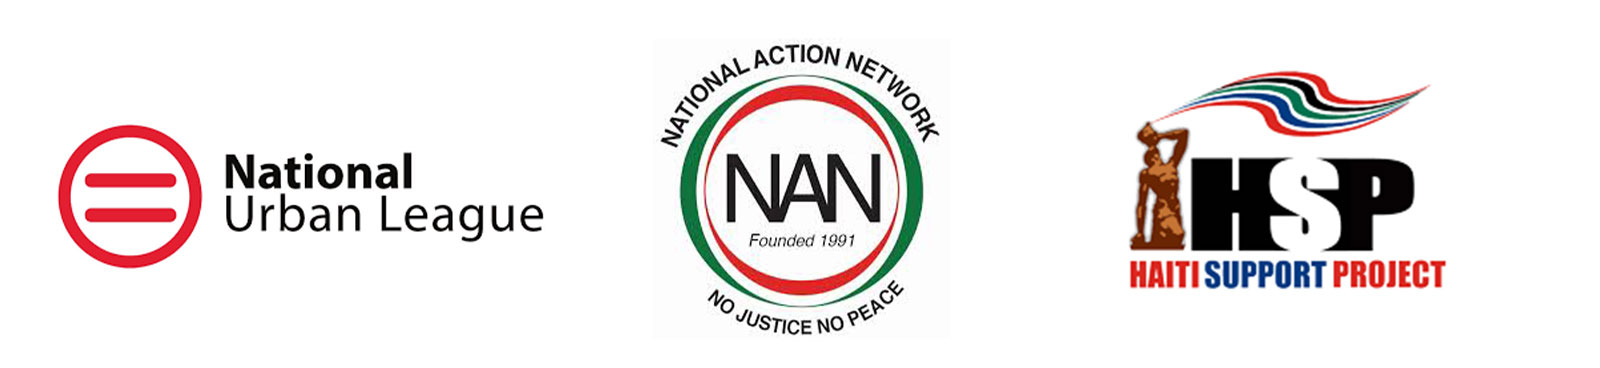 National Urban League, National Action Network, Haiti Support Project